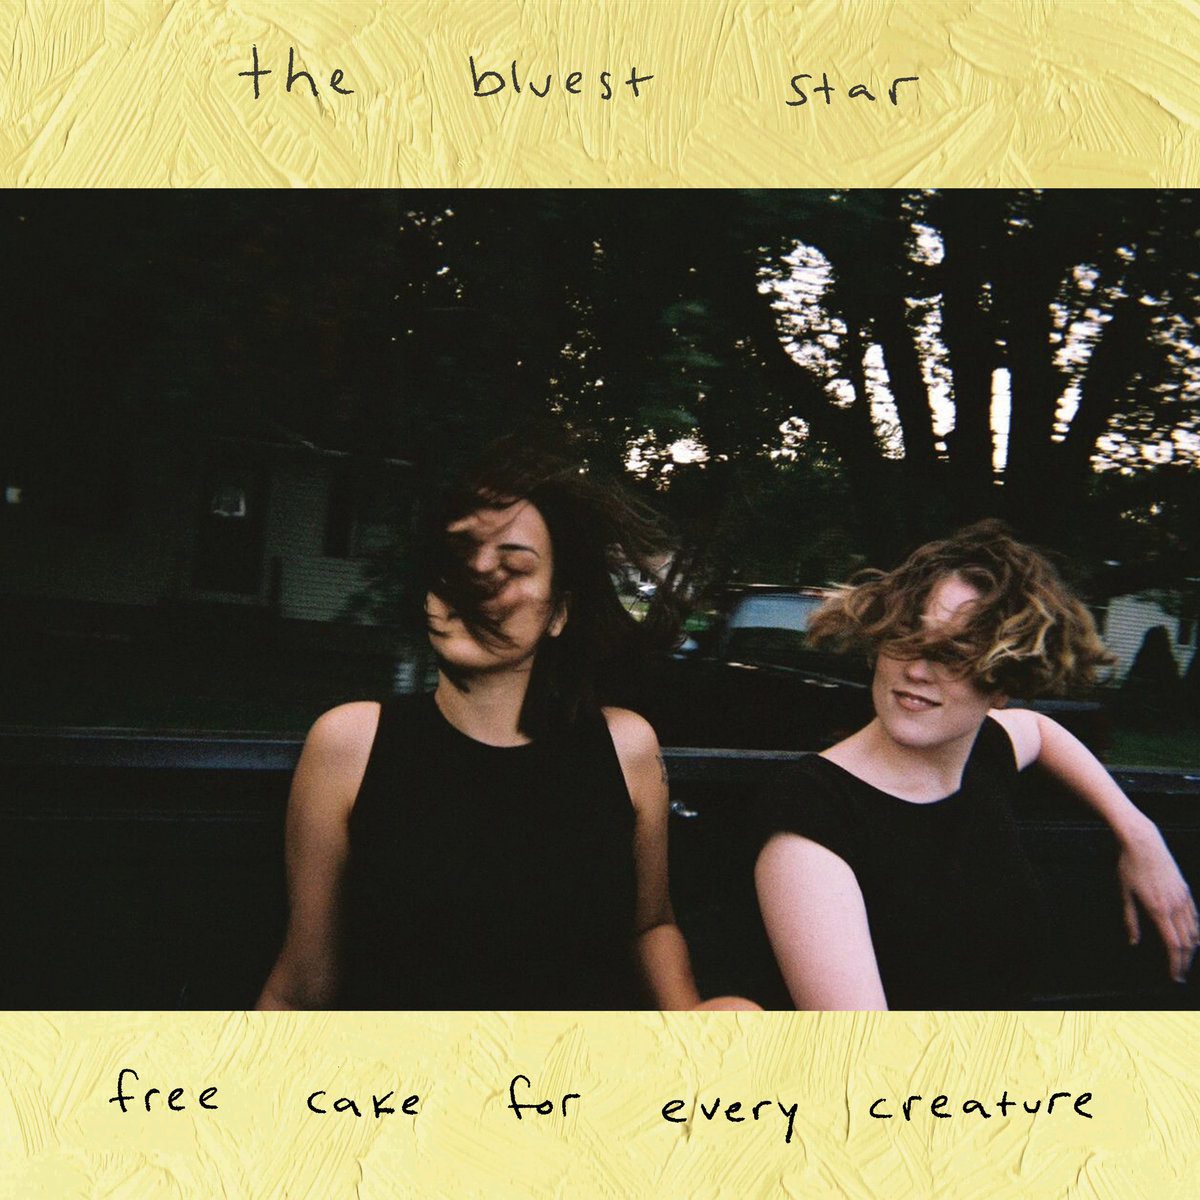 Free Cake For Every Creature Release Single “around you” and Announce New Album “the bluest star”